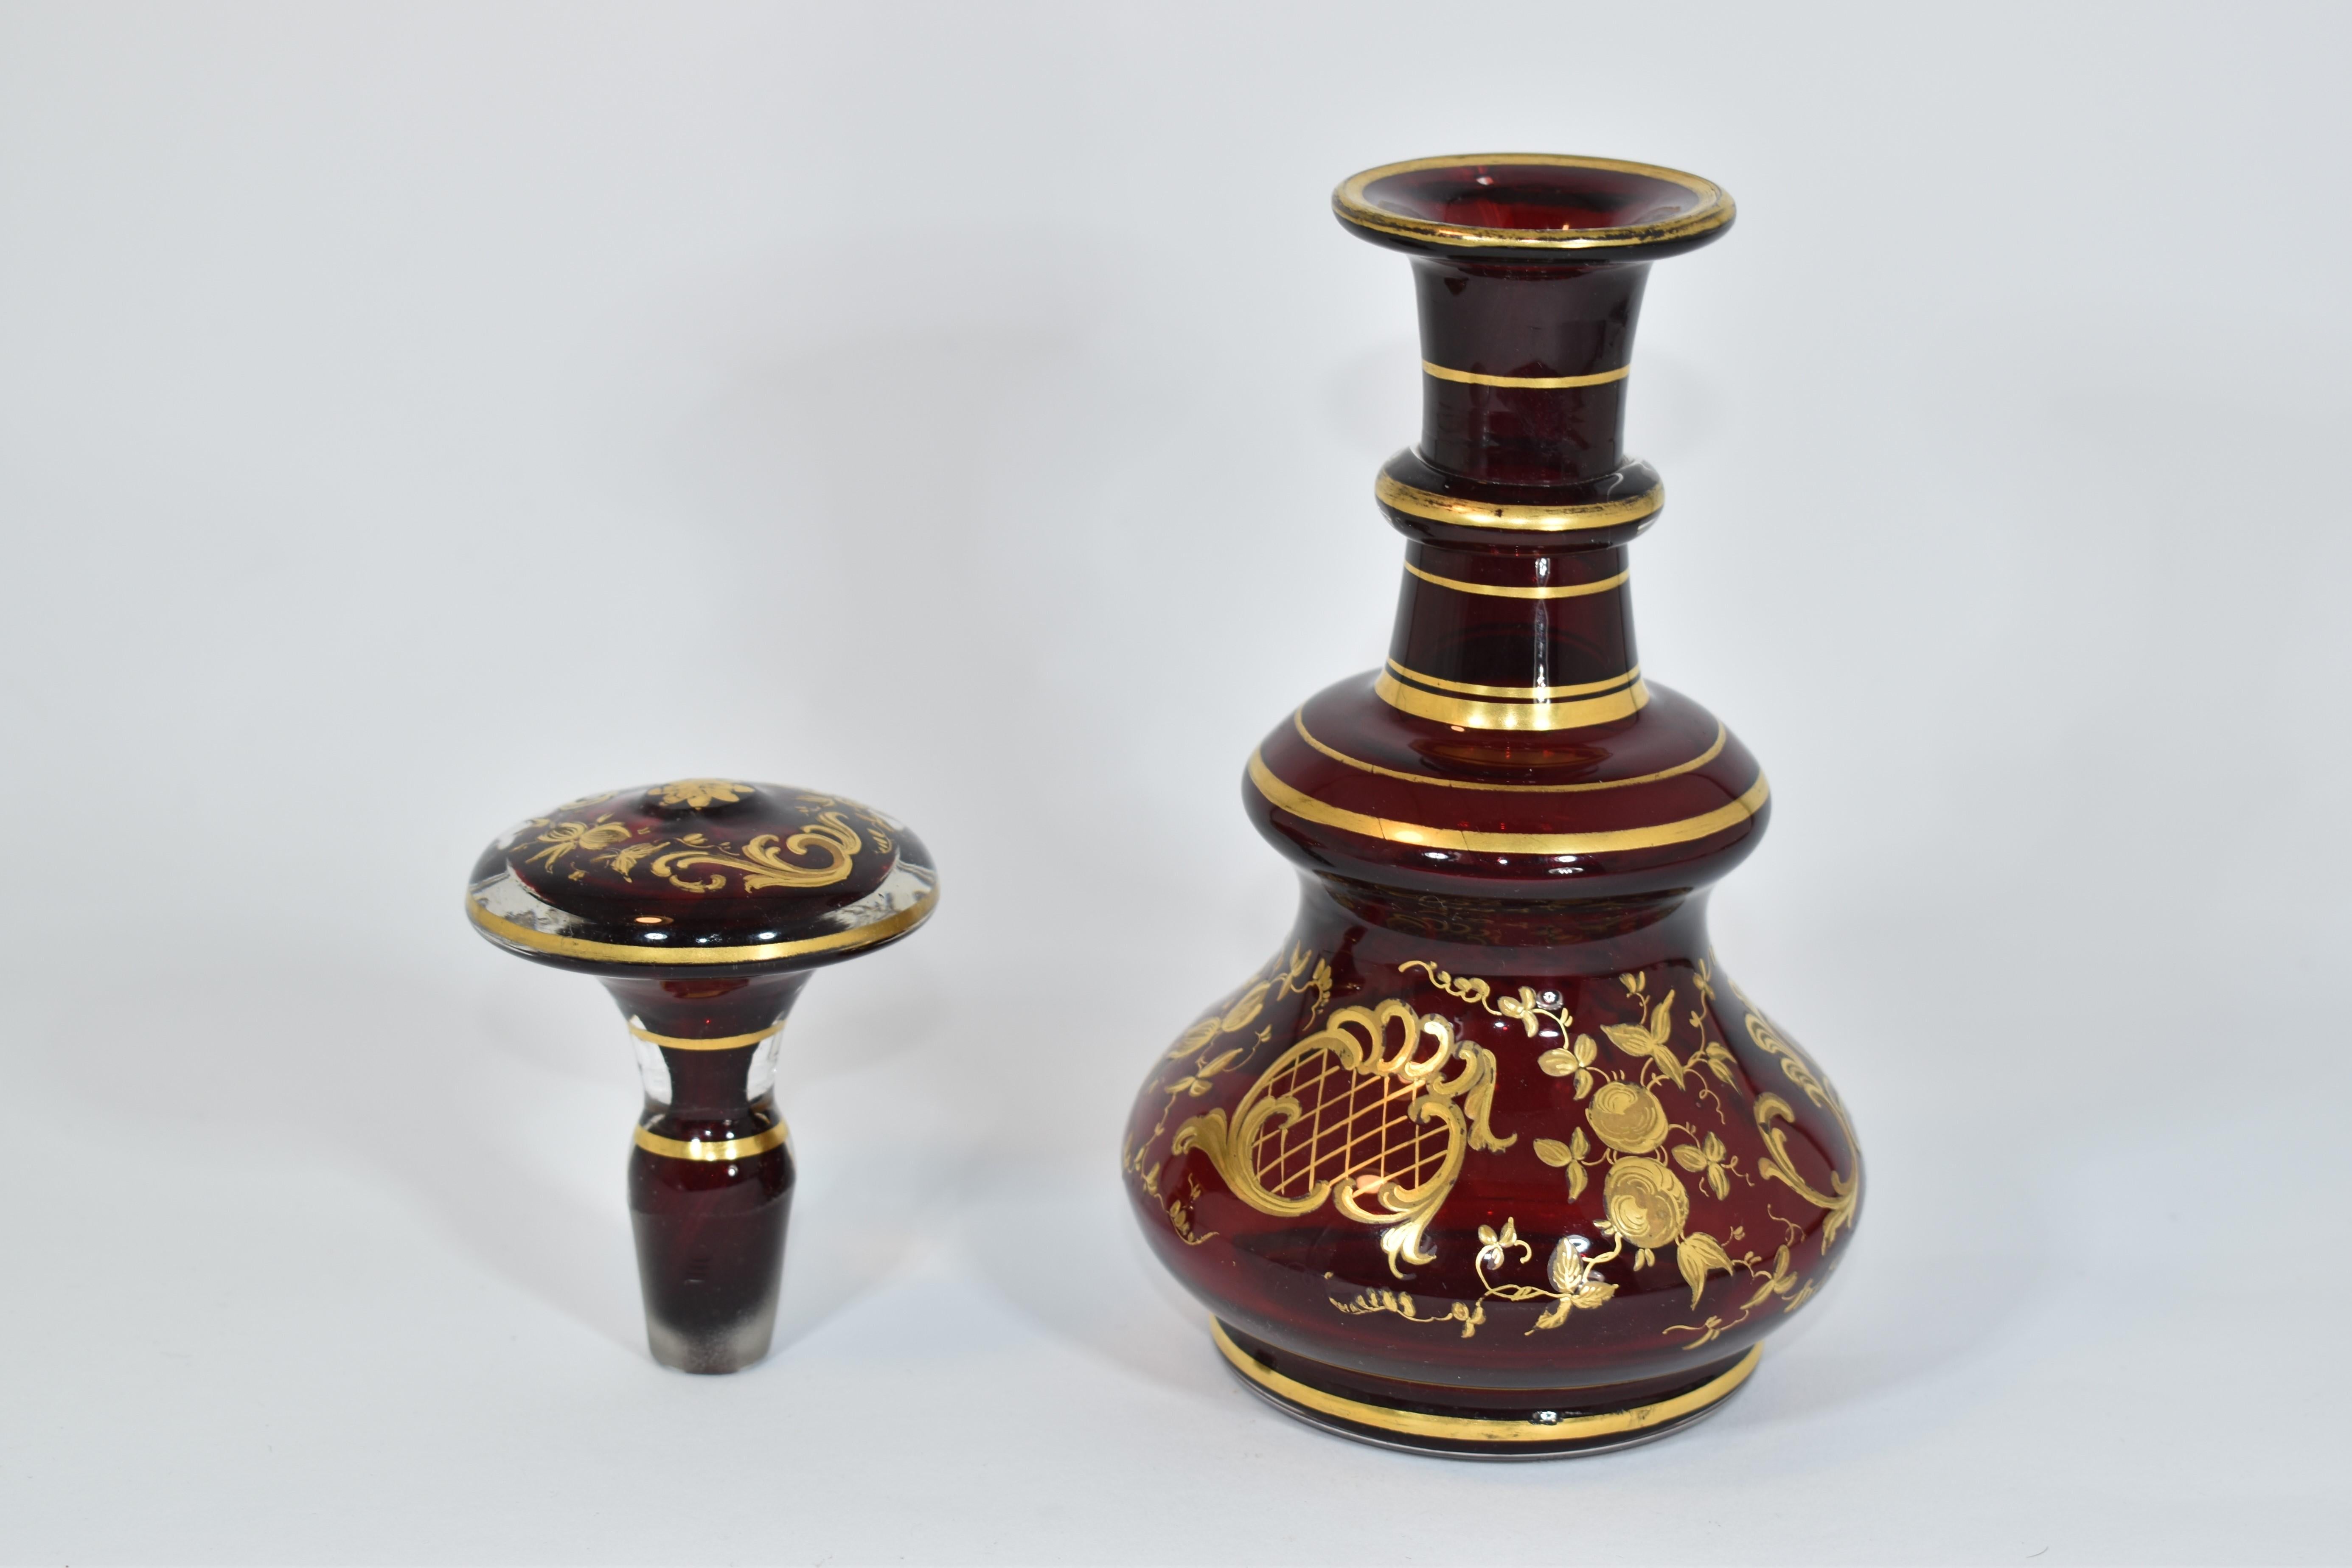 Antique Bohemian Ruby Red Enameled Glass Perfume Bottle, Flacon, 19th Century In Good Condition For Sale In Rostock, MV